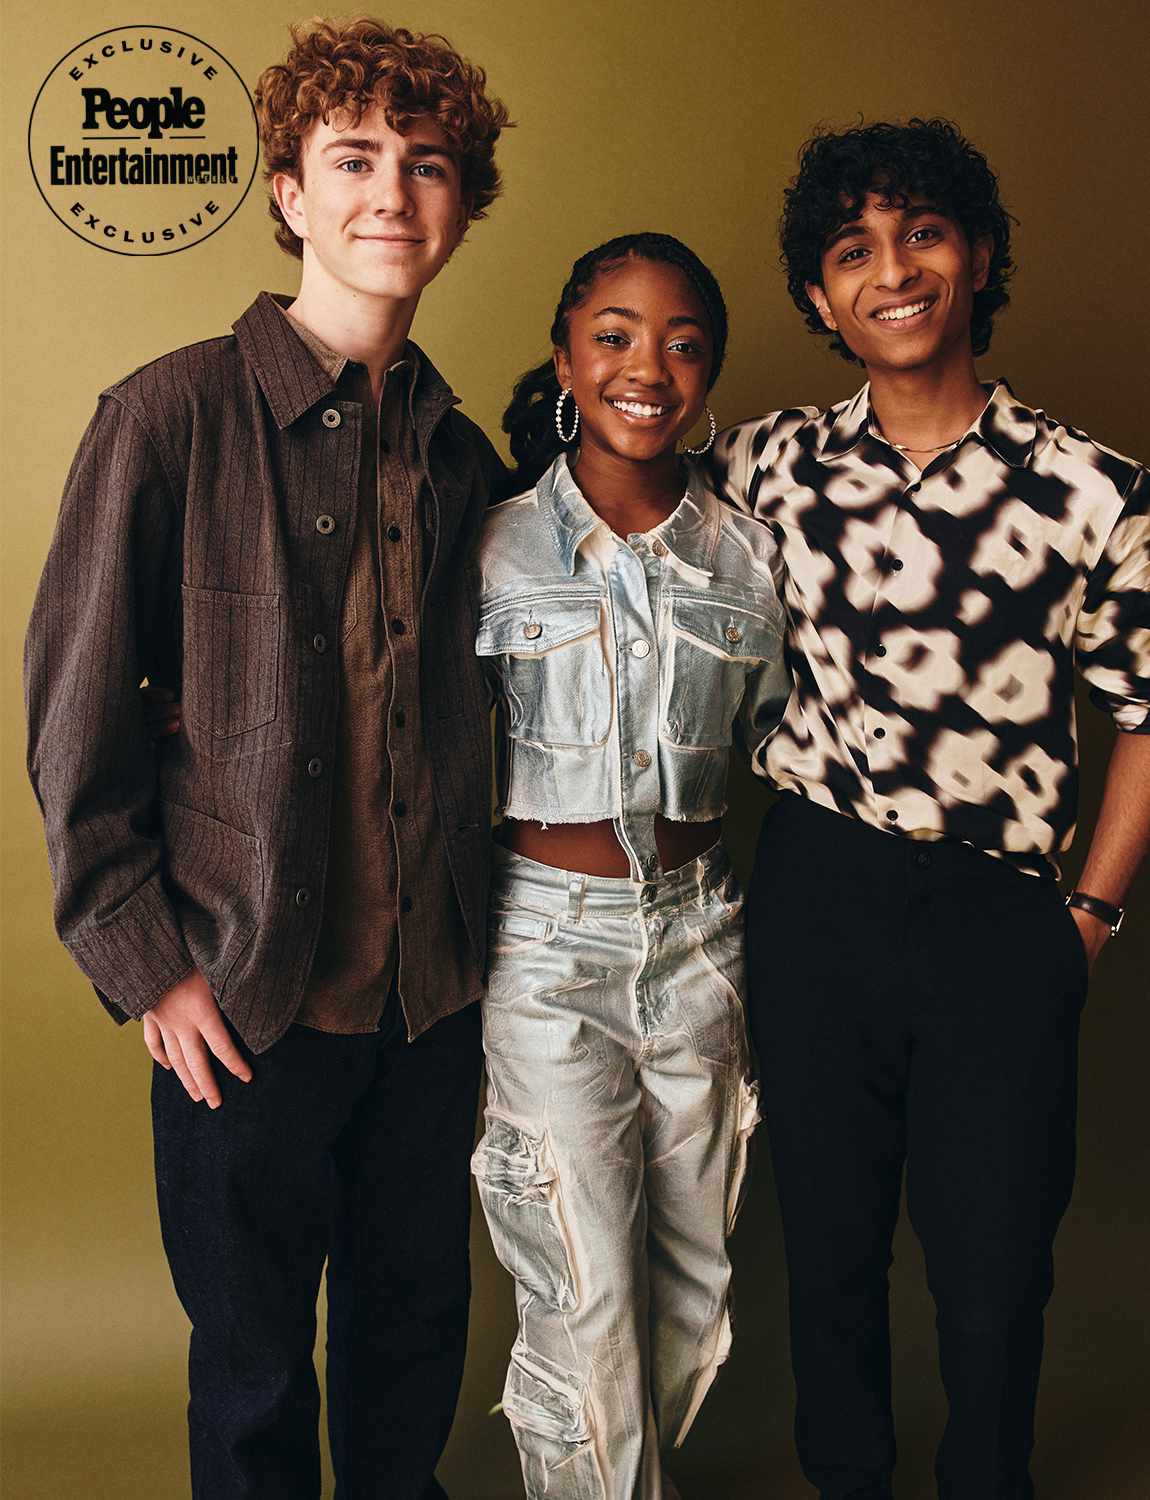 Walker Scobell, Leah Sava' Jeffries and Aryan Simhadri of "Percy Jackson and the Olympians" pose for a portrait during the 2024 Winter Television Critics Association 